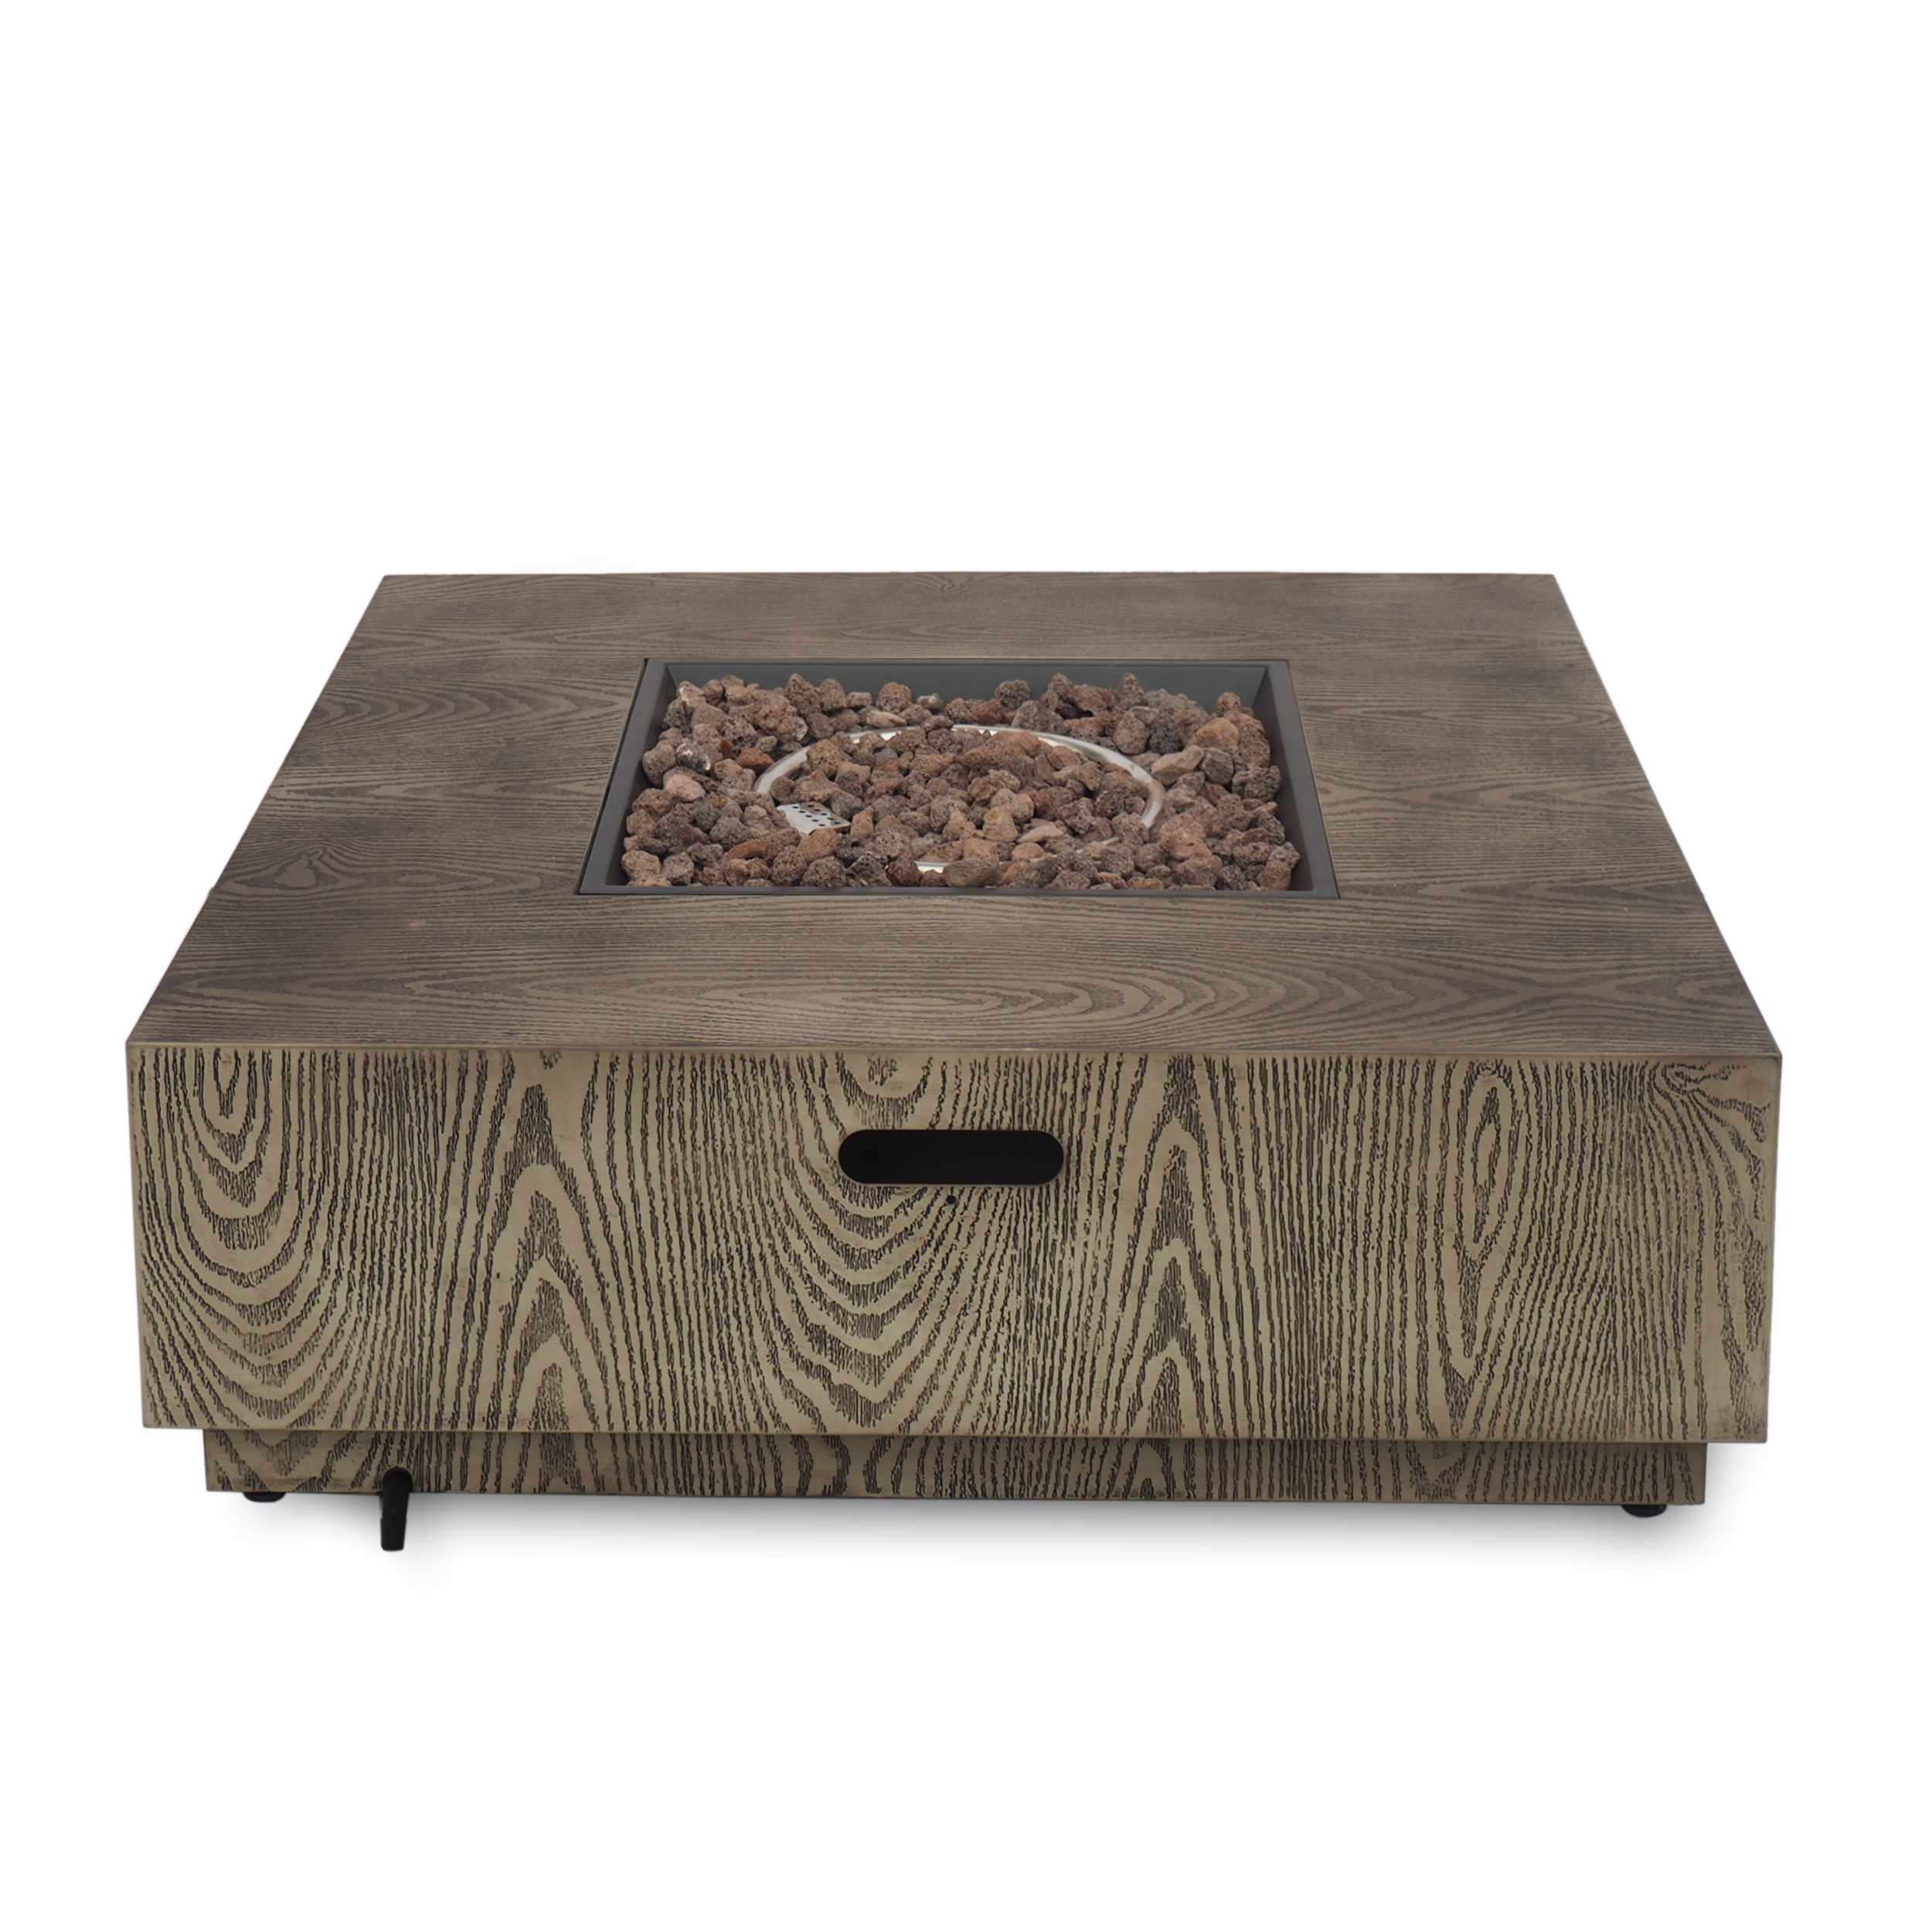 Noble House Wellington Square Outdoor Metal Fire Pit with Tank Holder in Brown - image 9 of 10